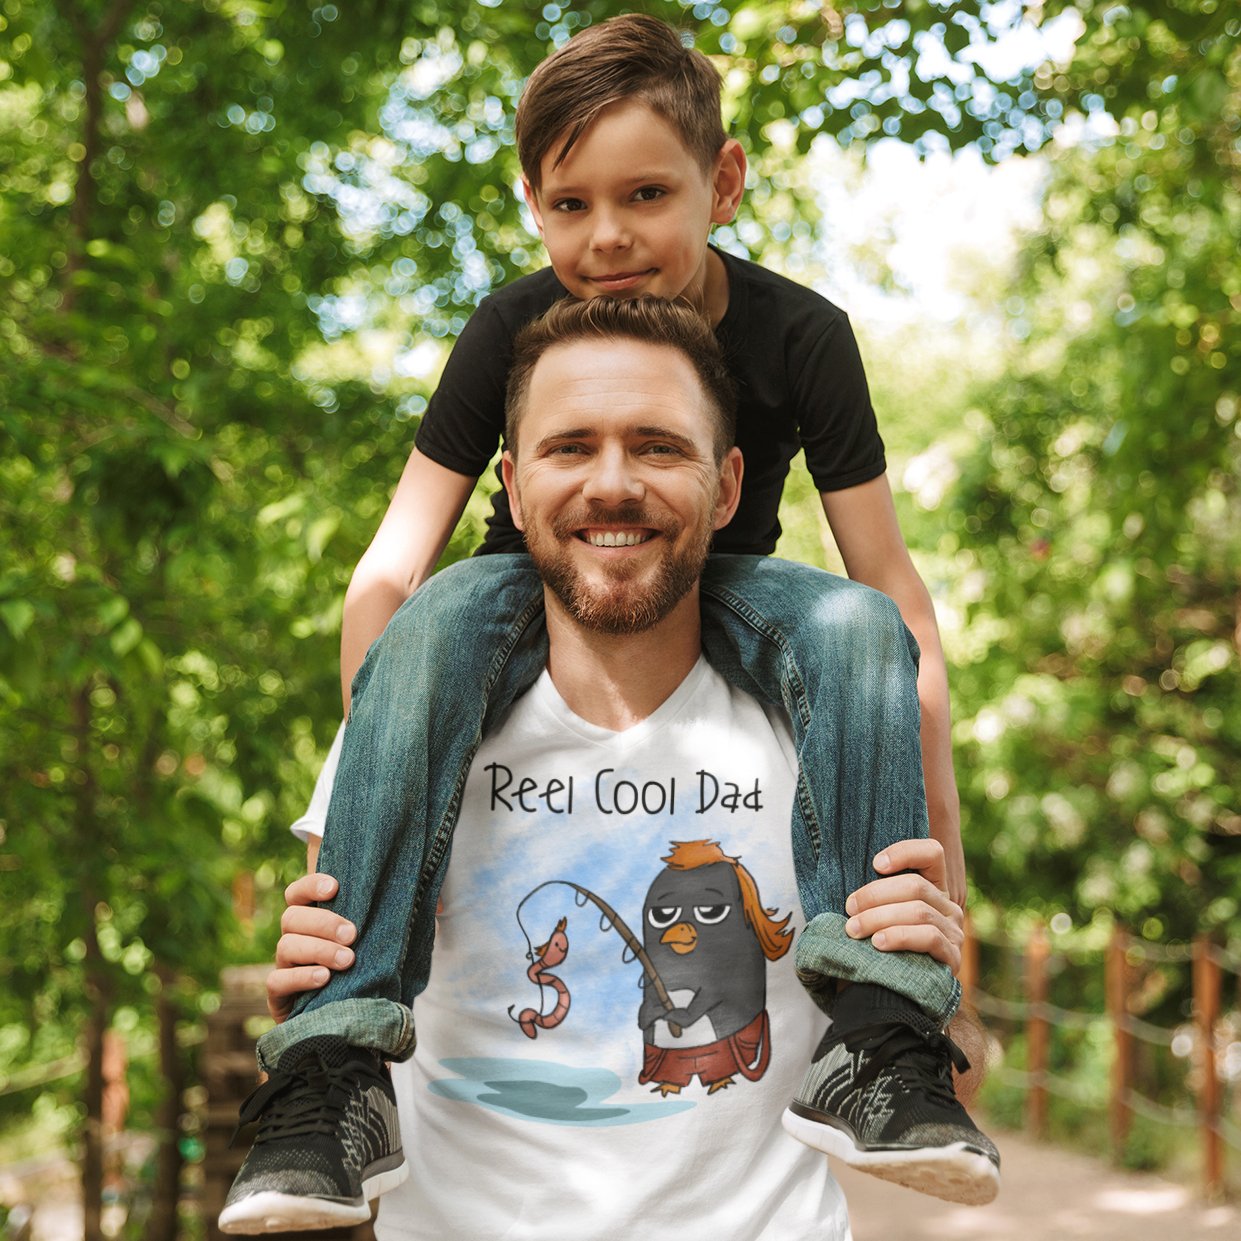 Master of the Reel: 'Reel Cool Dad' T-Shirt – Where Fishing Mastery Meets Effortless Cool!